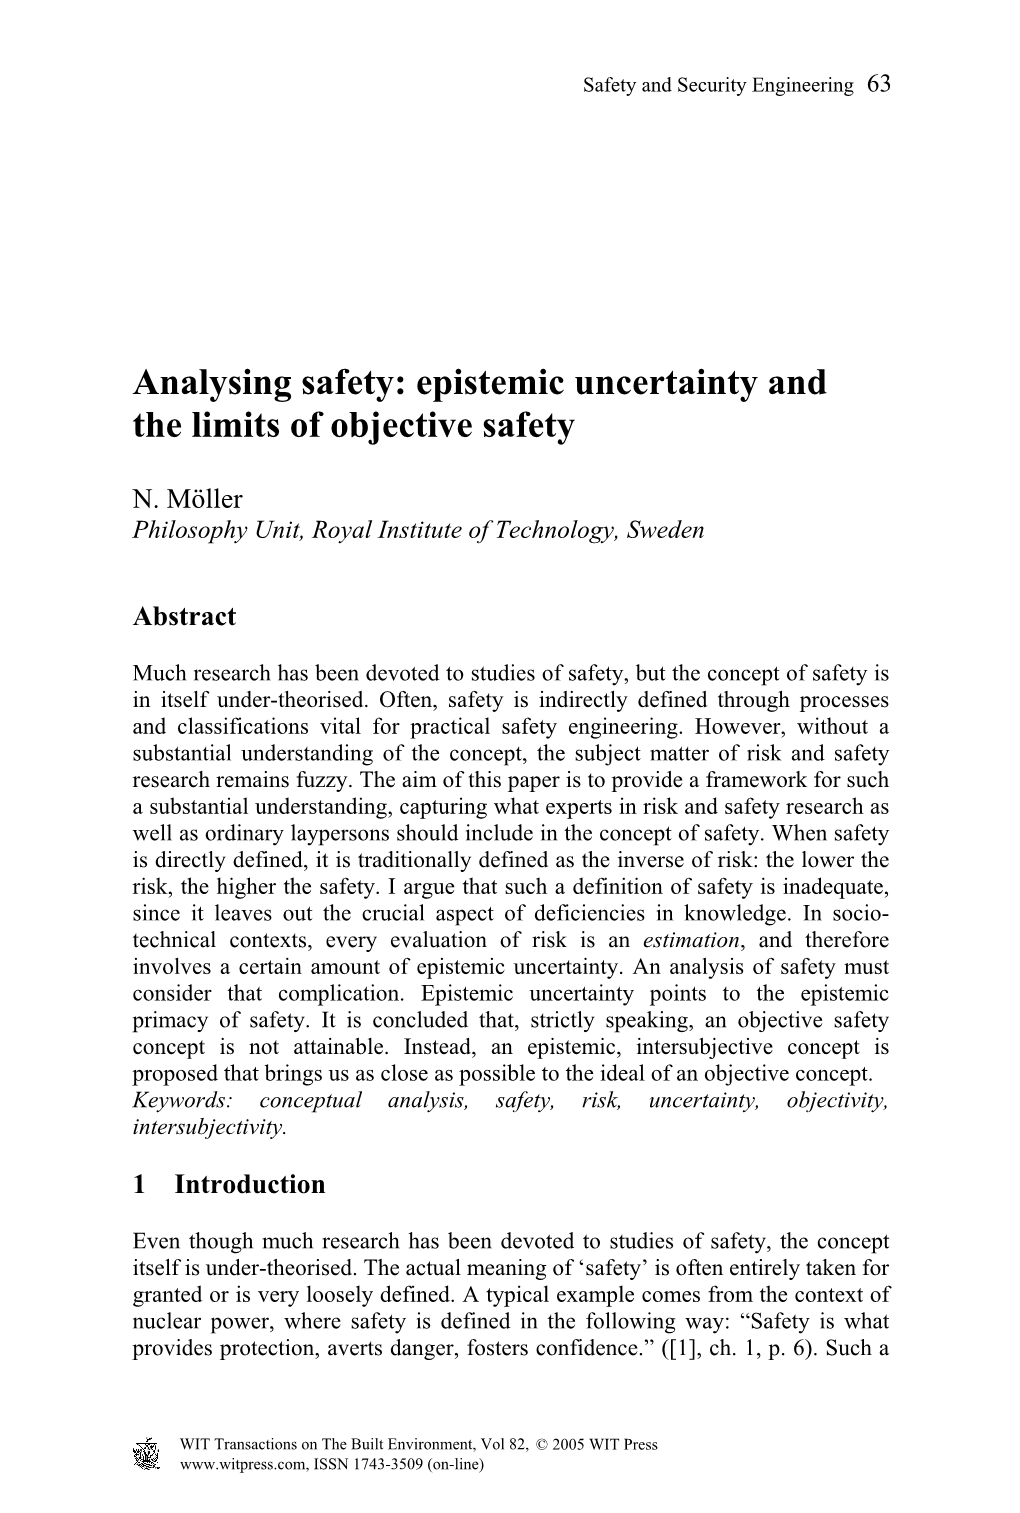 Epistemic Uncertainty and the Limits of Objective Safety